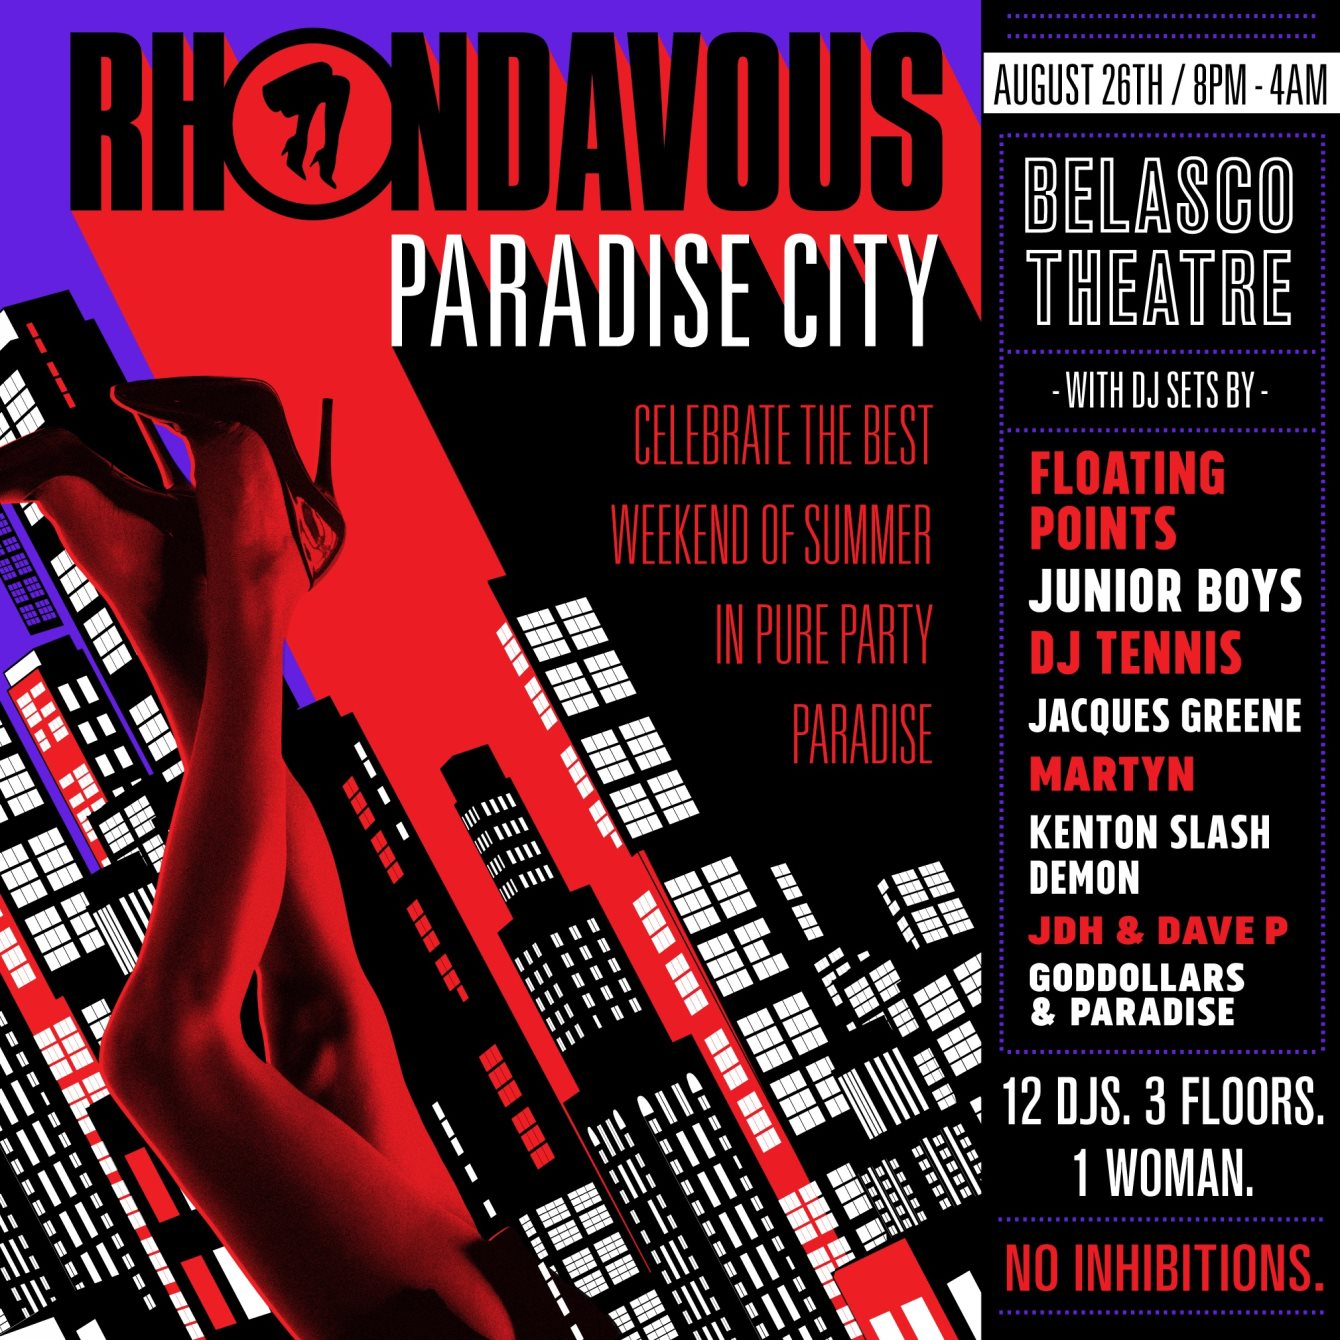 Paradise City w/ Floating Points, Junior Boys, DJ Tennis, Jacques Greene, Martyn, KSD + more - Flyer front